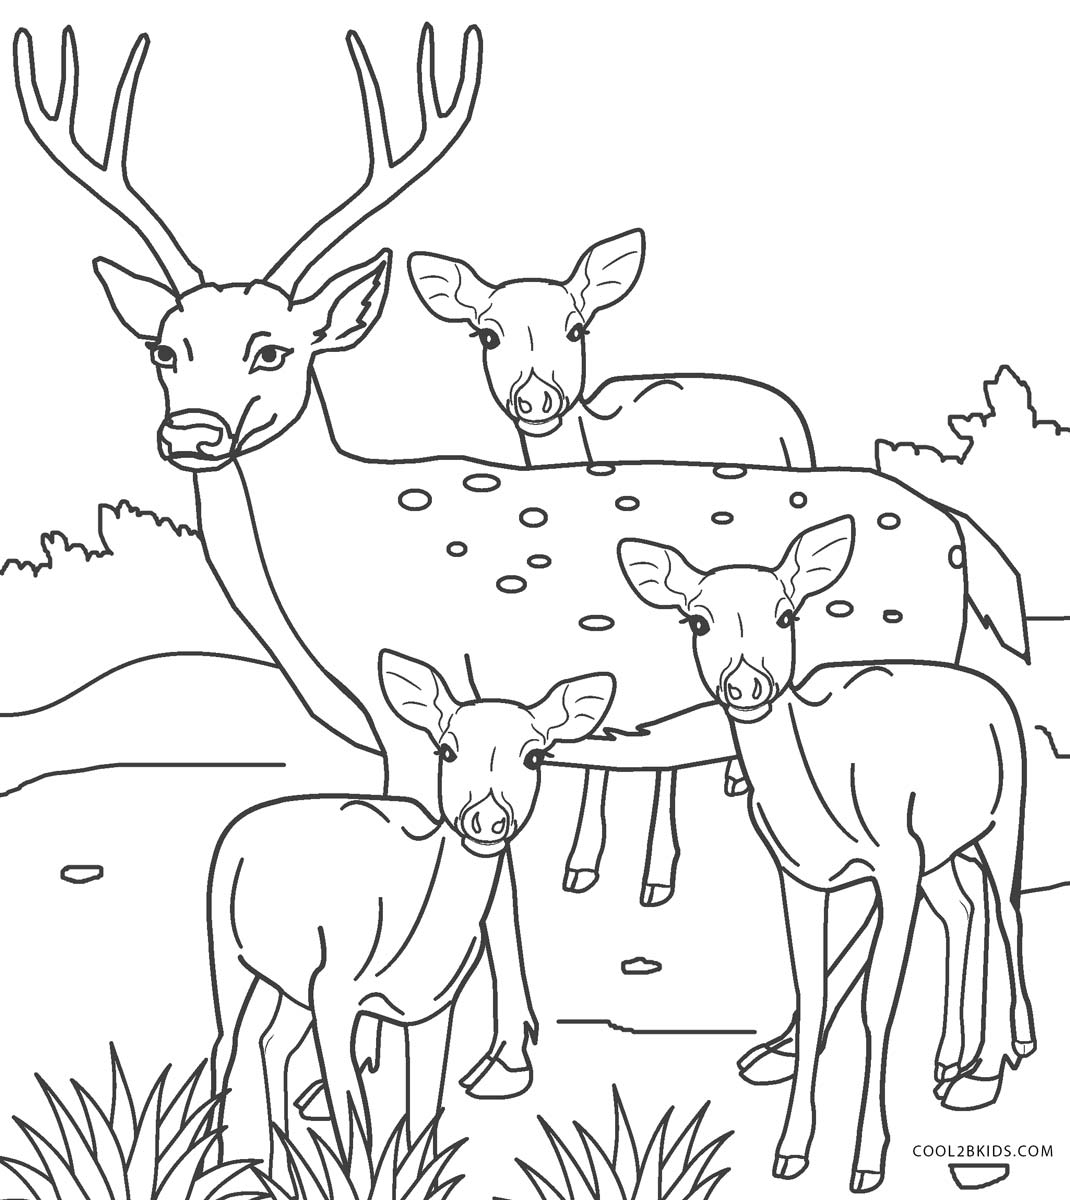 Coloring Pages Of Realistic Deer - Red deer coloring pages download and